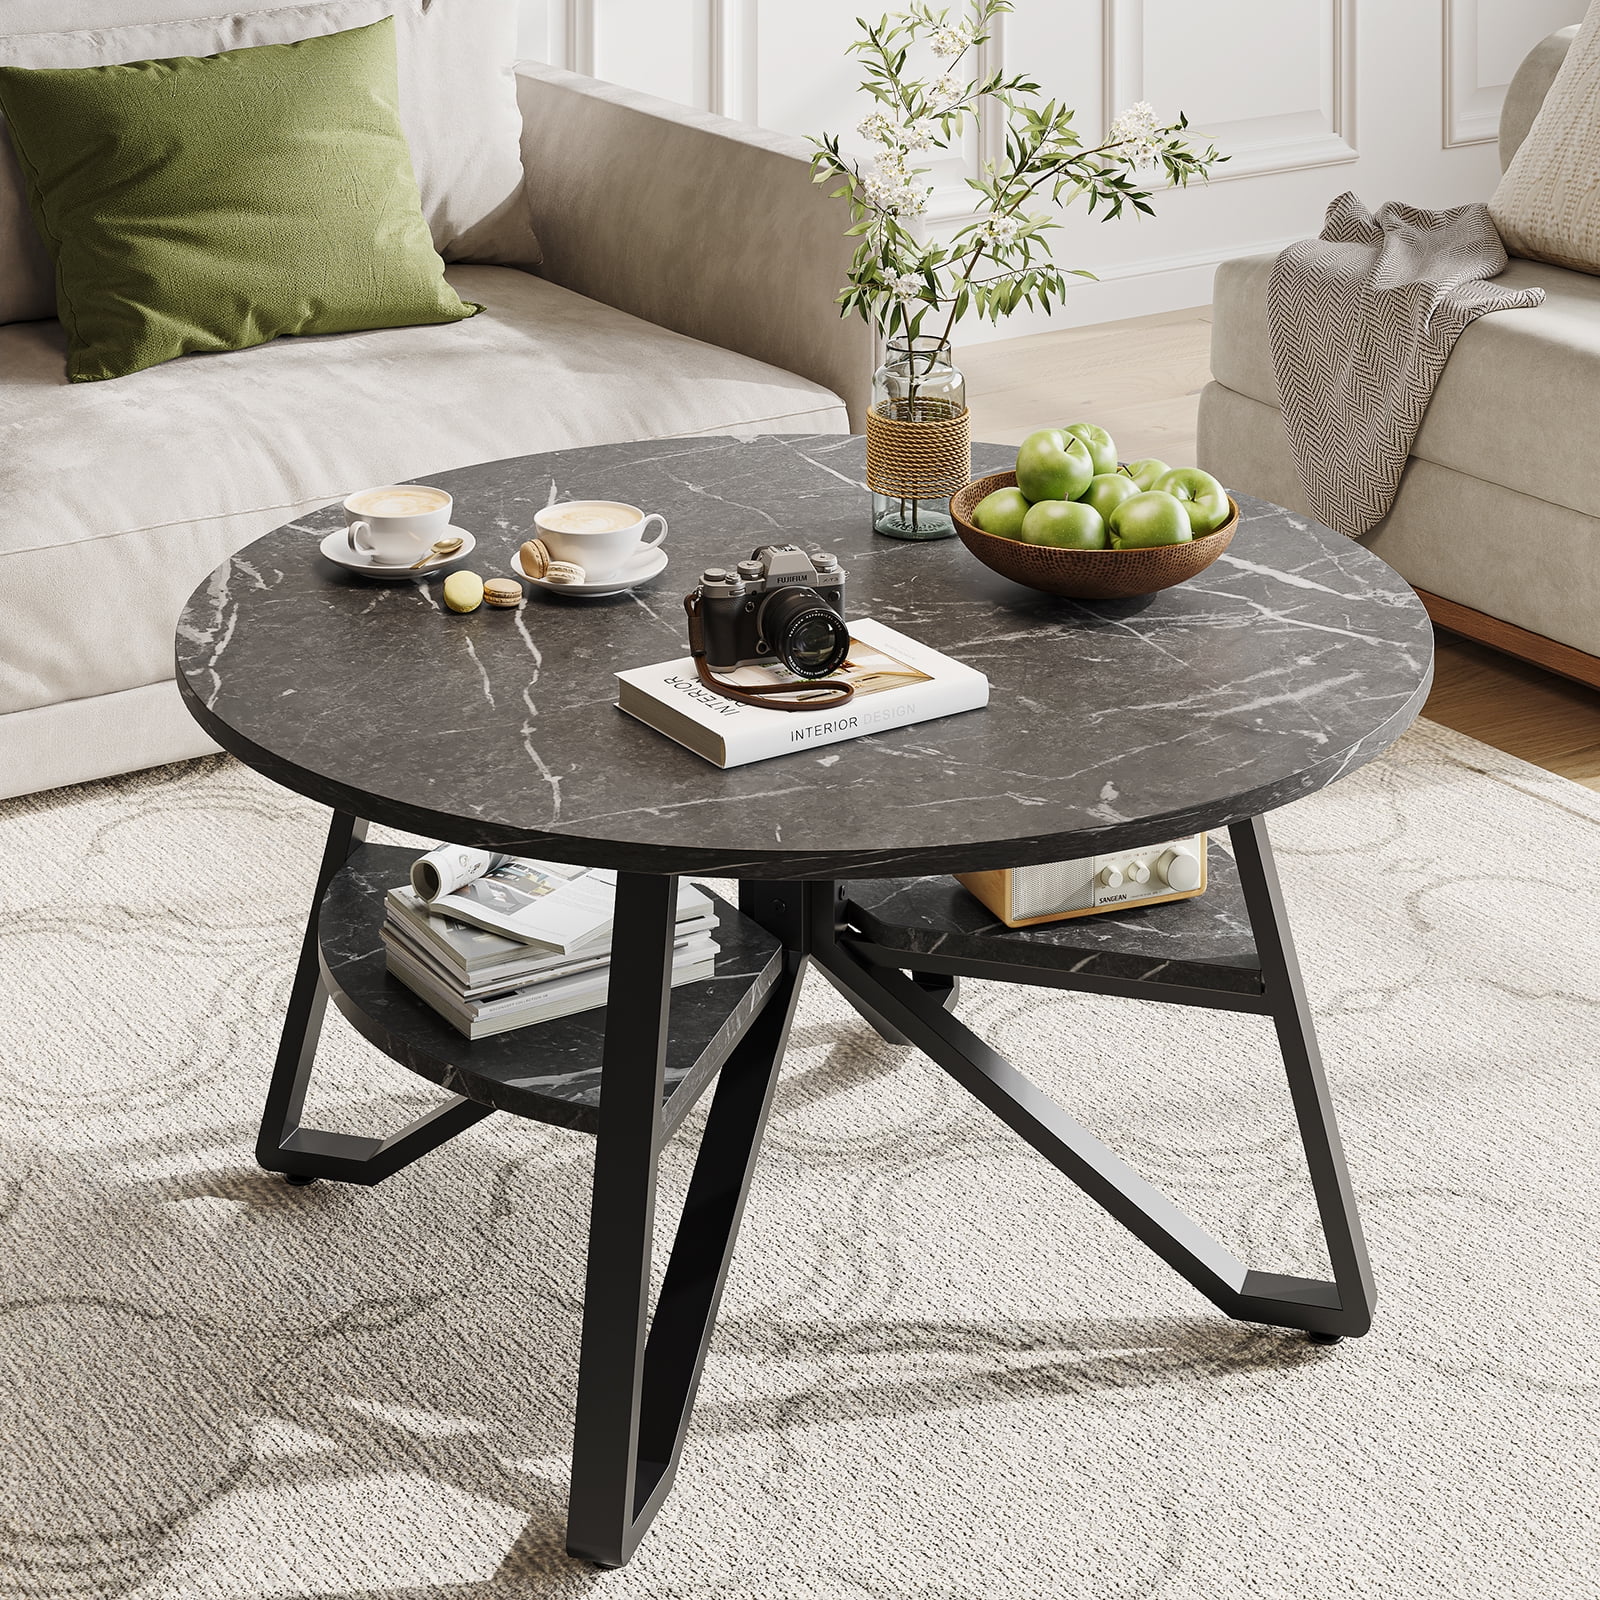 Bestier Round Coffee Table With Storage Living Room Tables Sy Metal Legs Retro Grey Oak Com